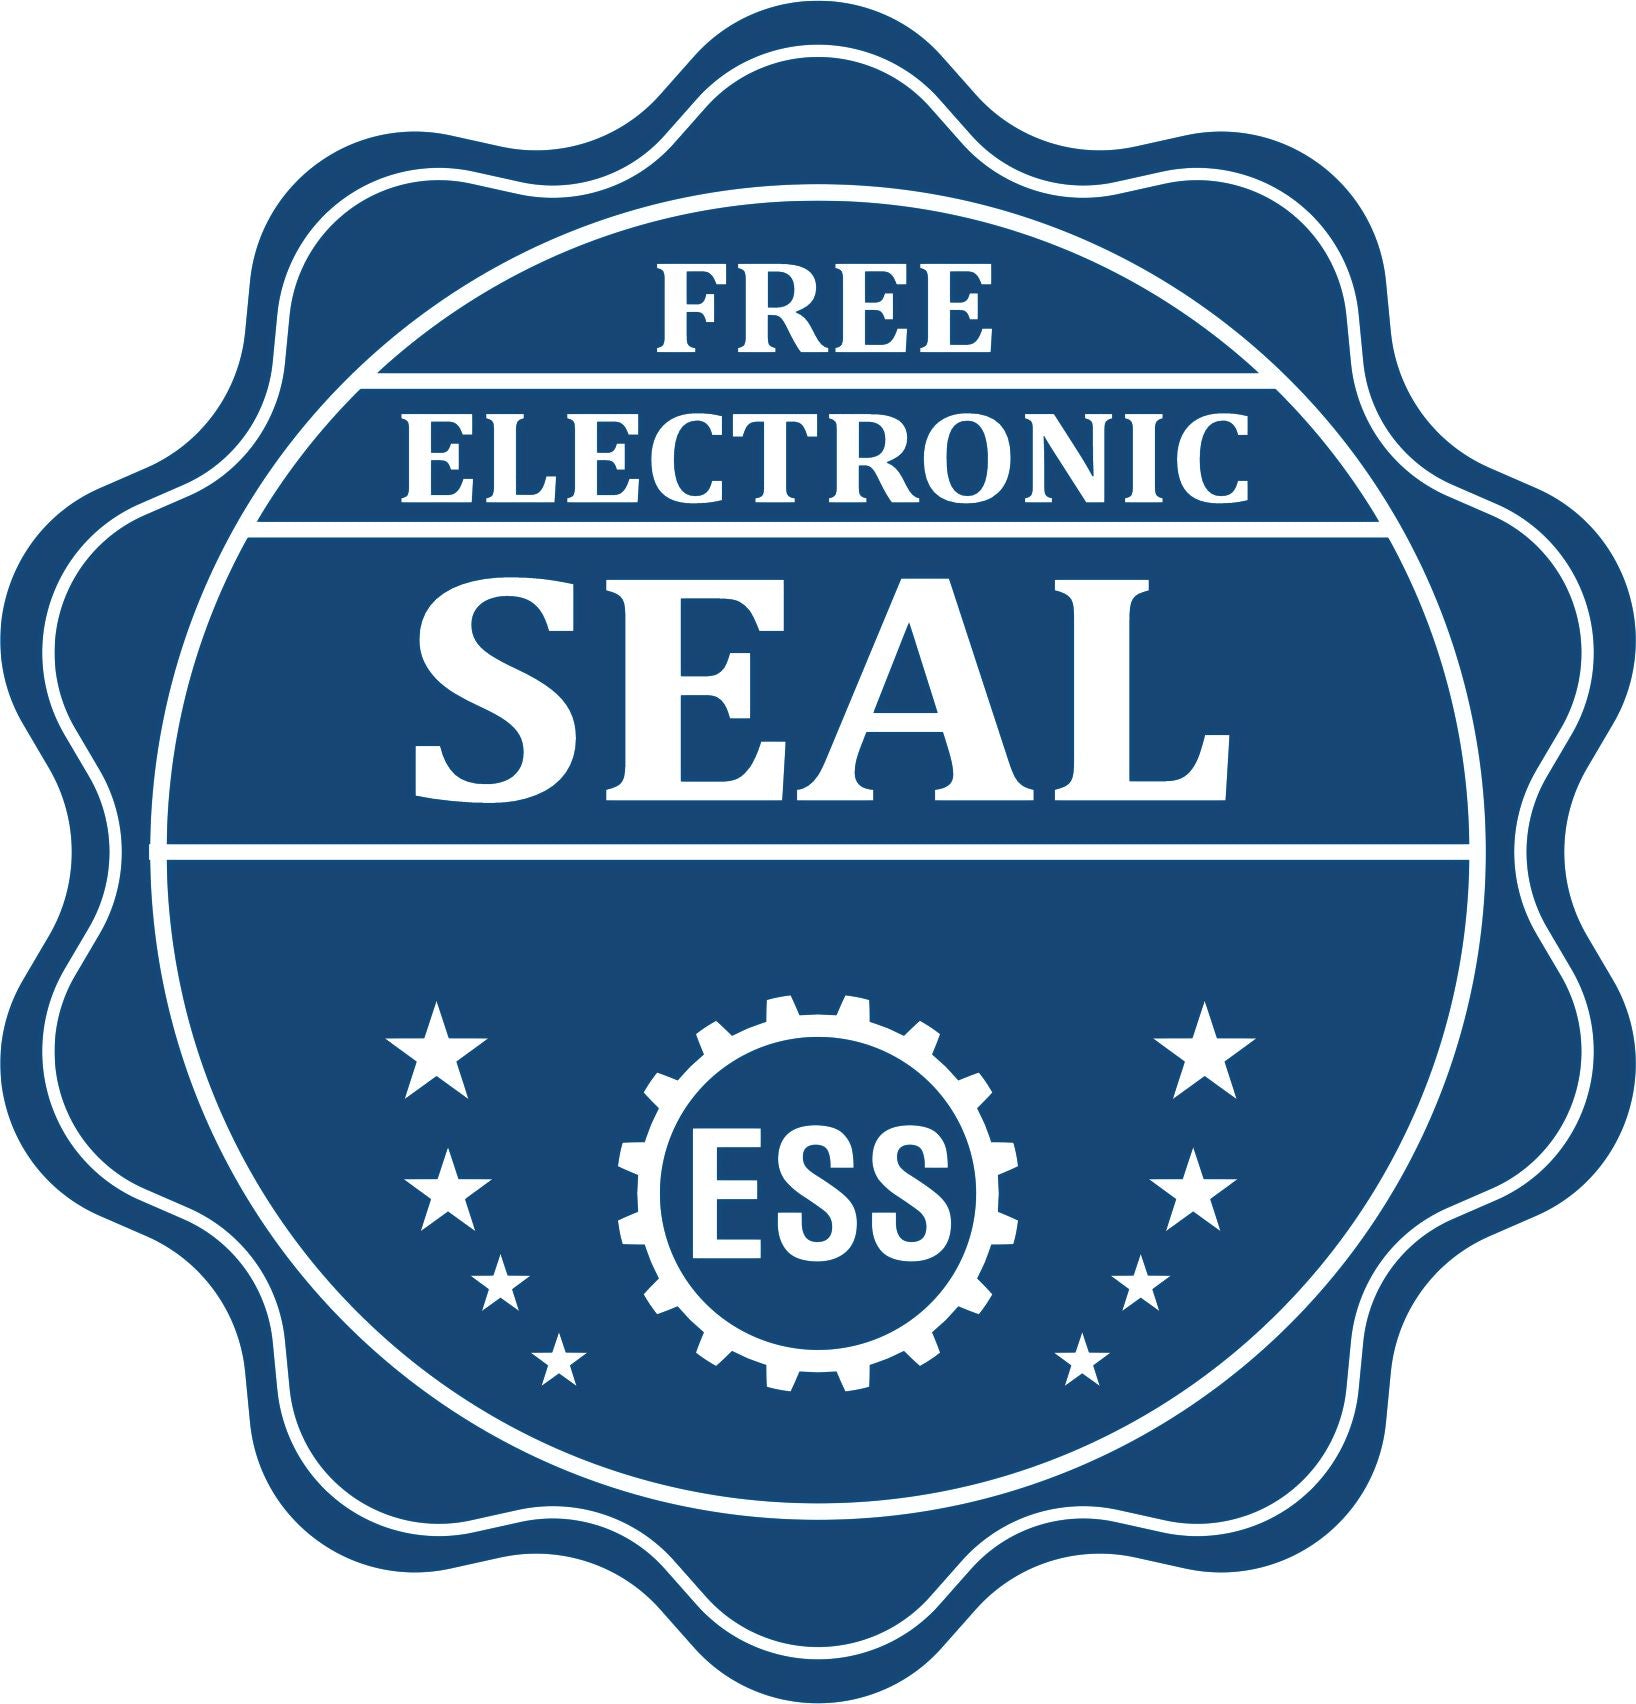 A badge showing a free electronic seal for the Long Reach Kentucky Geology Seal with stars and the ESS gear on the emblem.